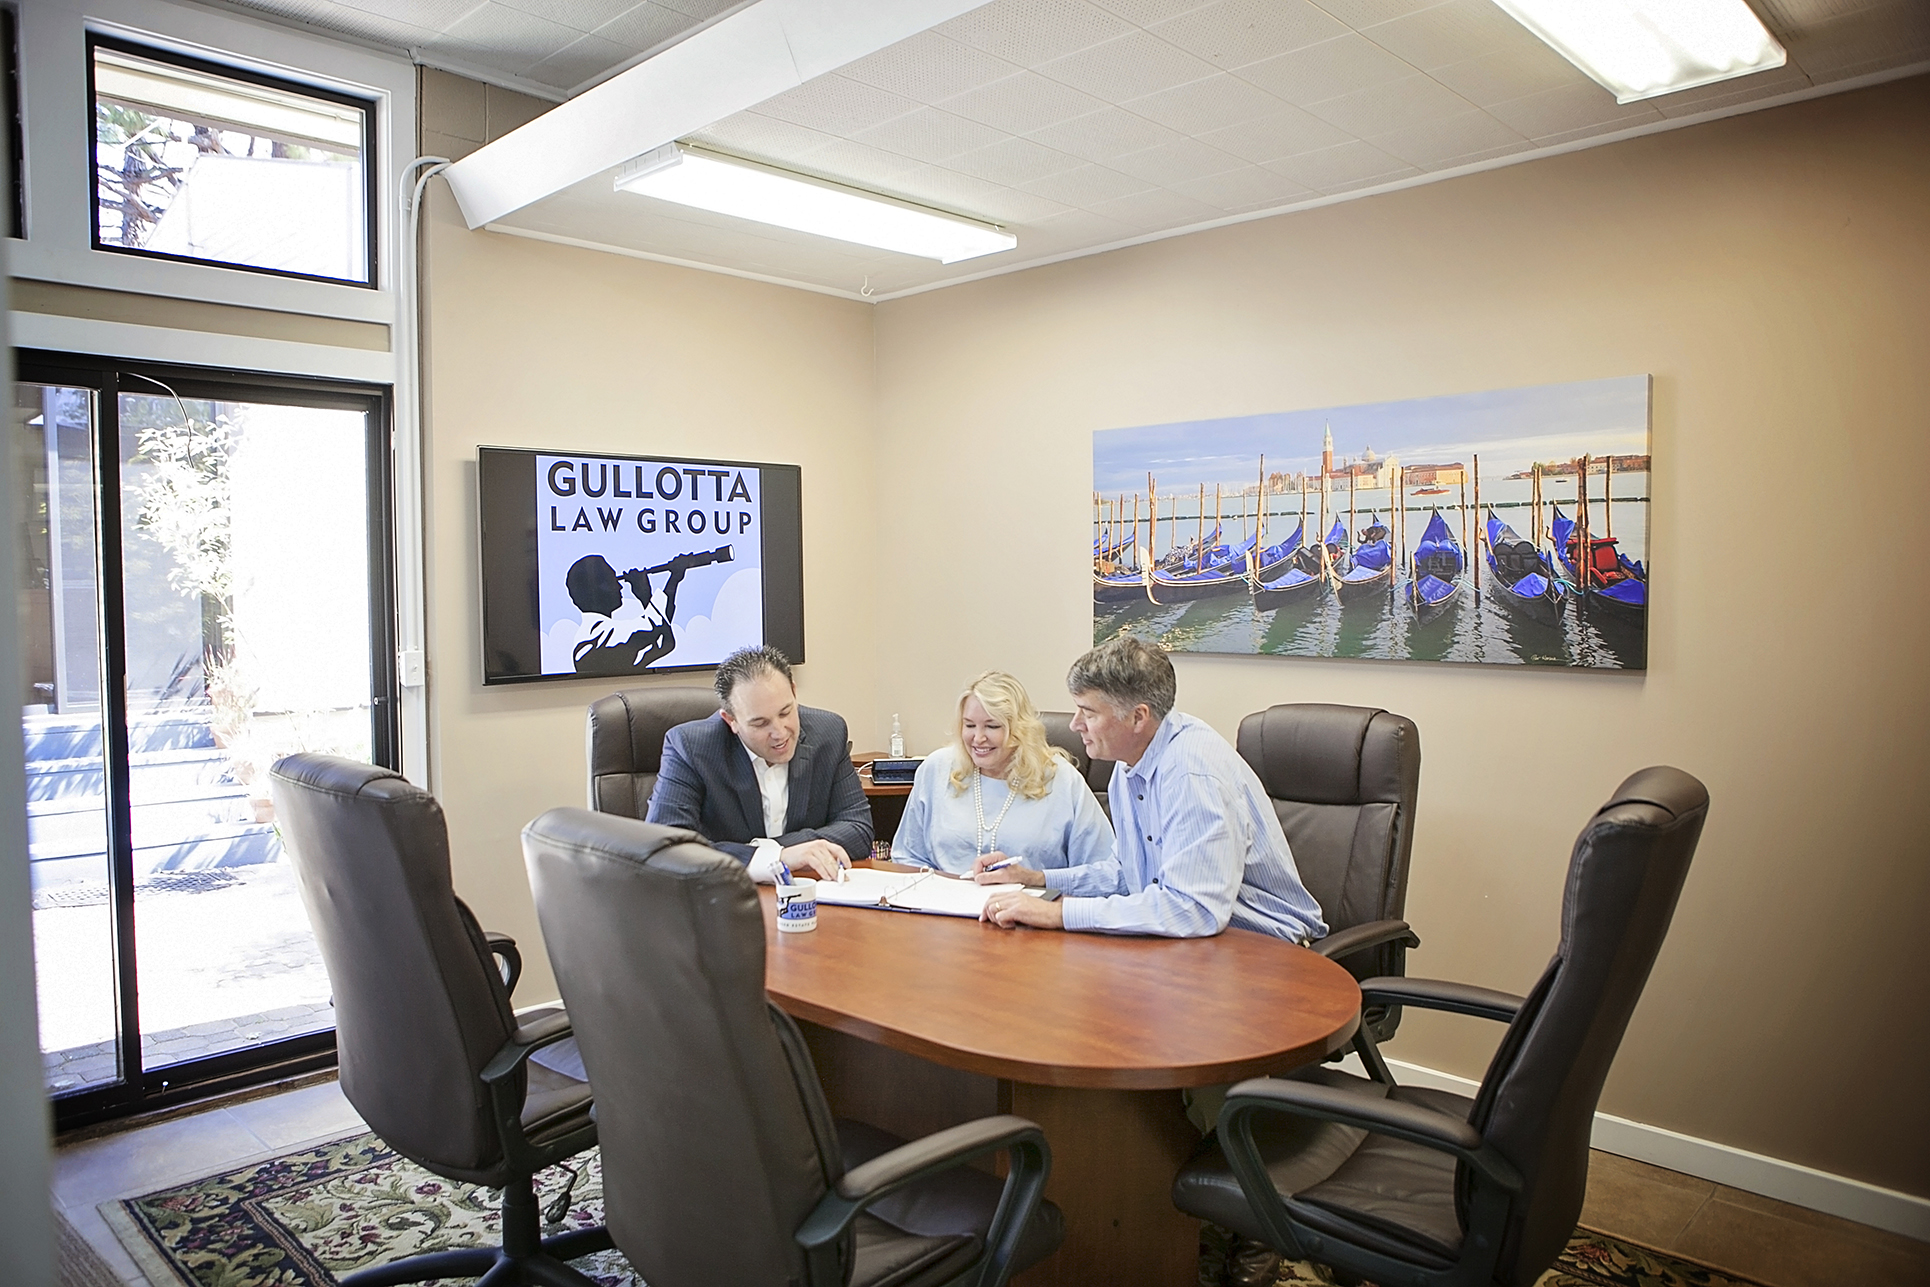 Meeting in the Gullotta Law Group Conference Room